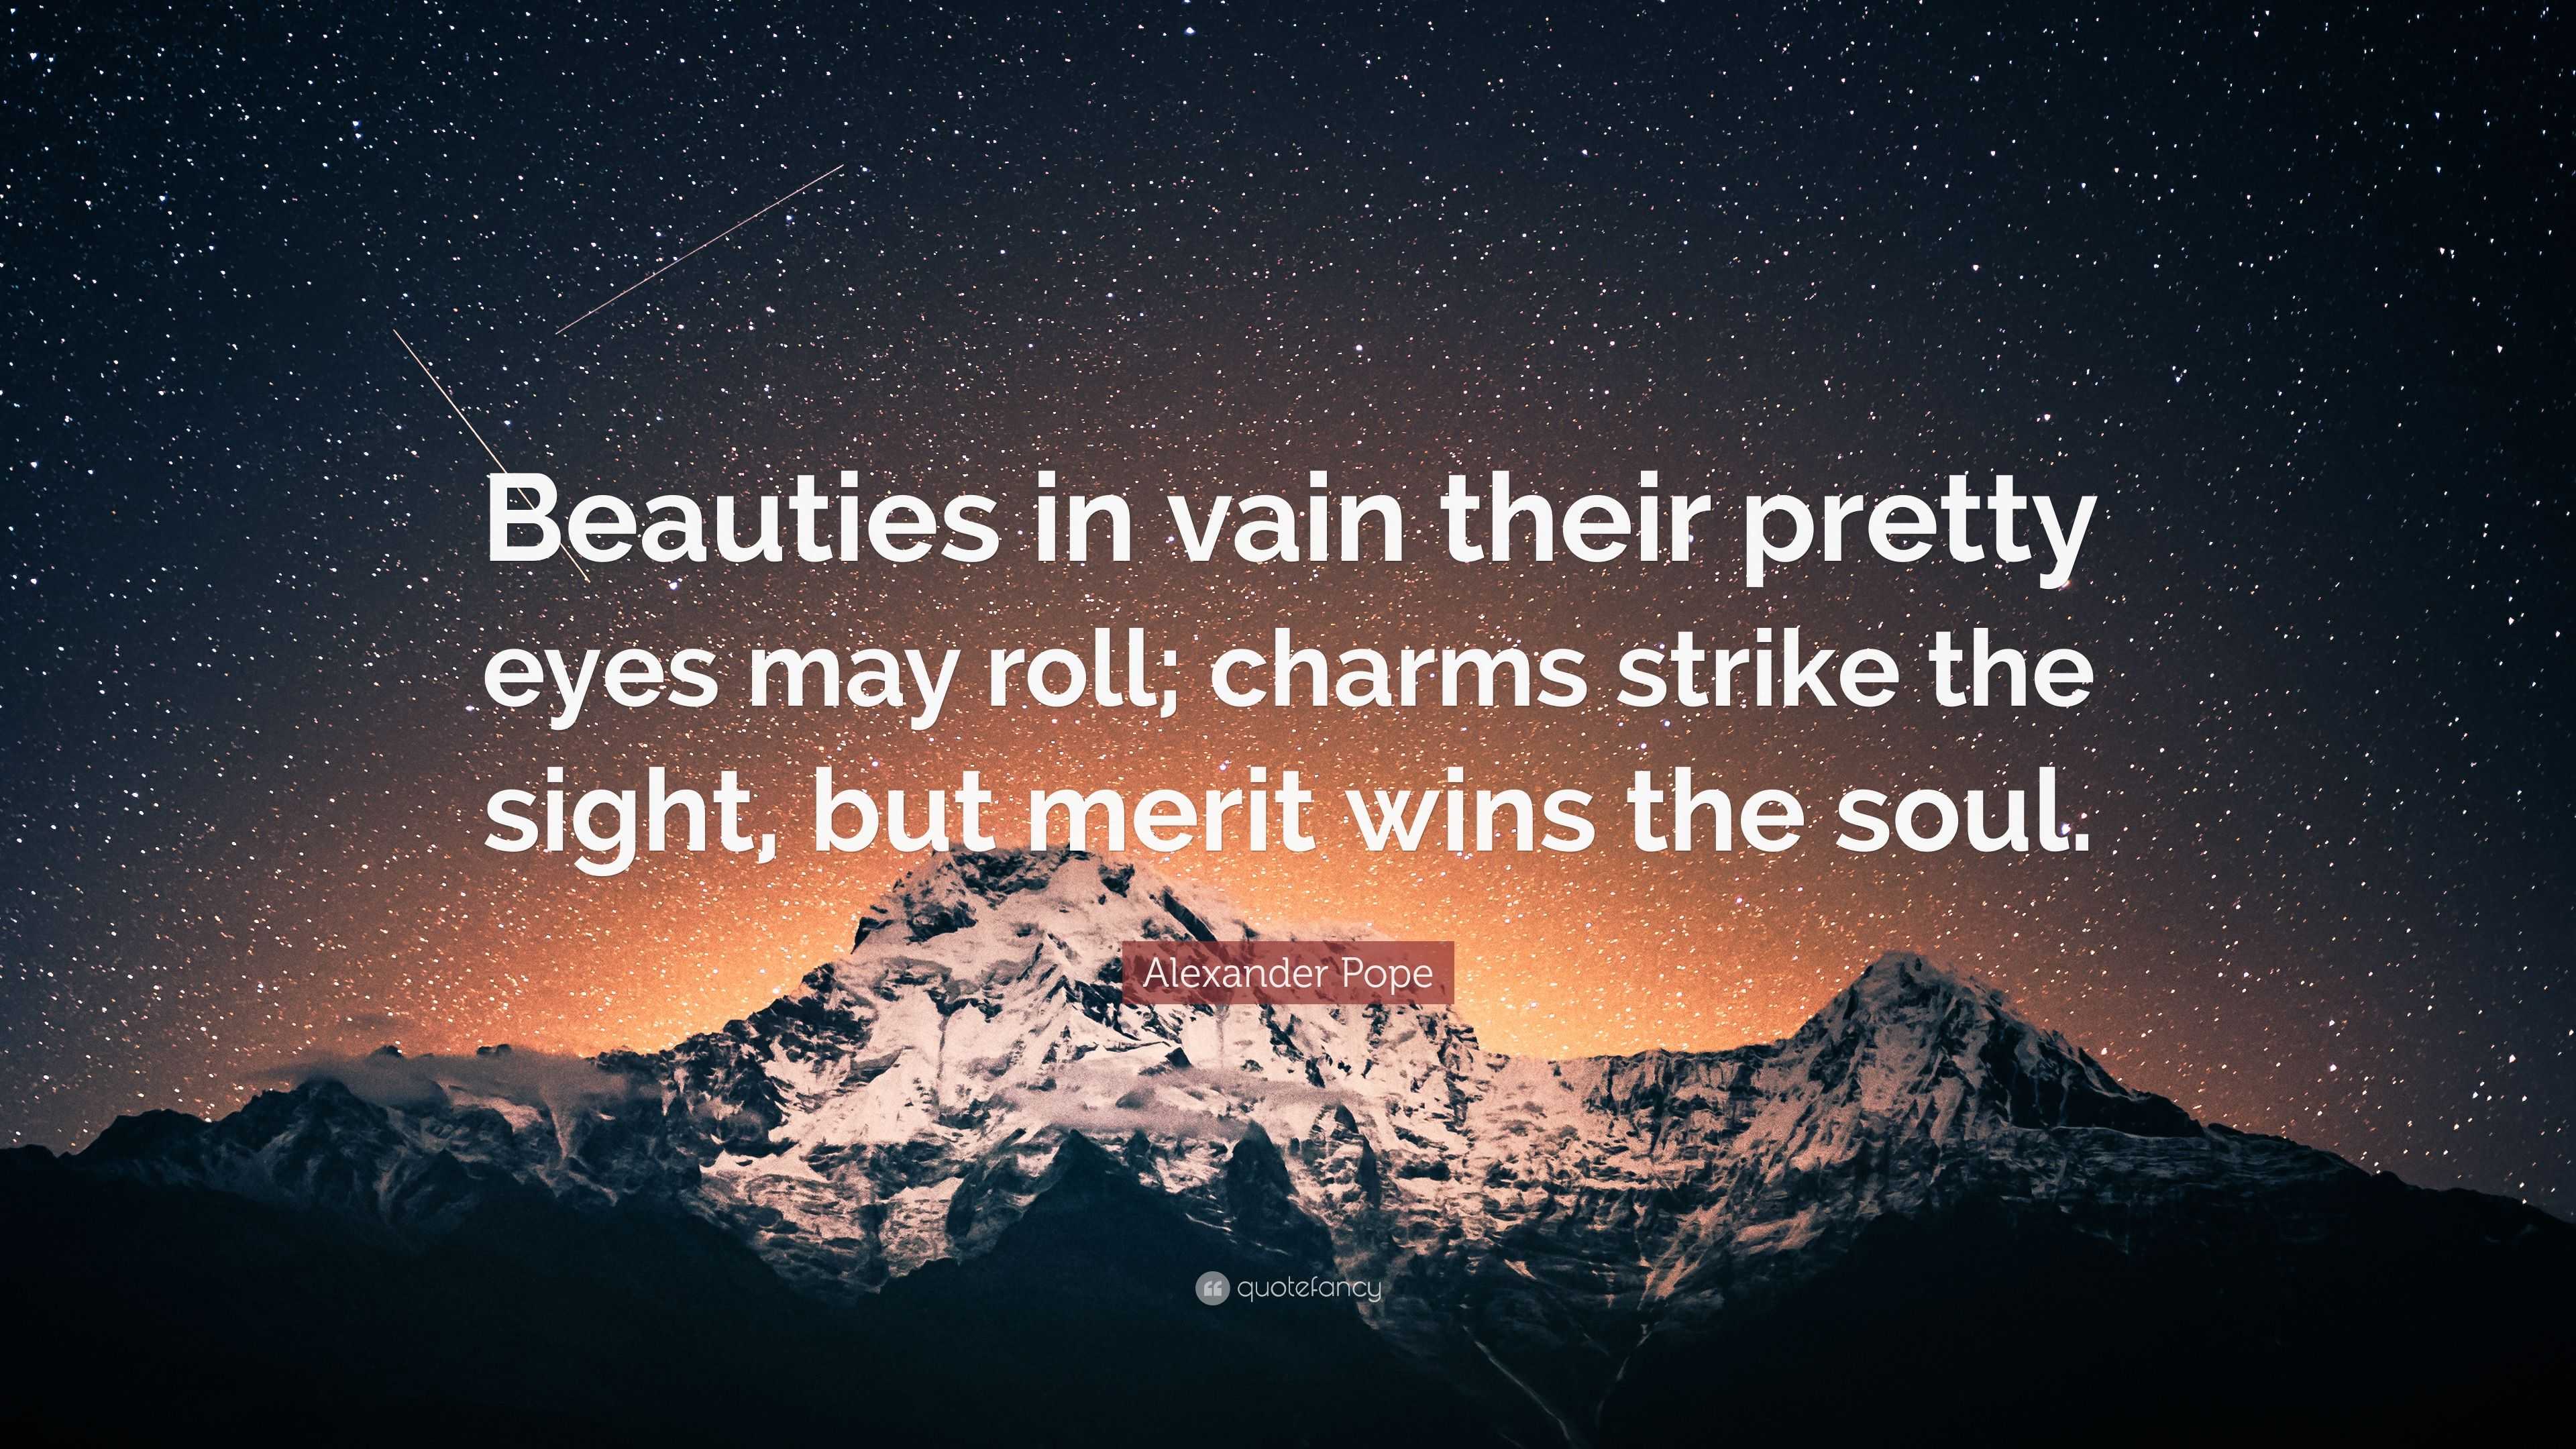 Alexander Pope Quote: Charm strikes the sight, but merit wins the soul.